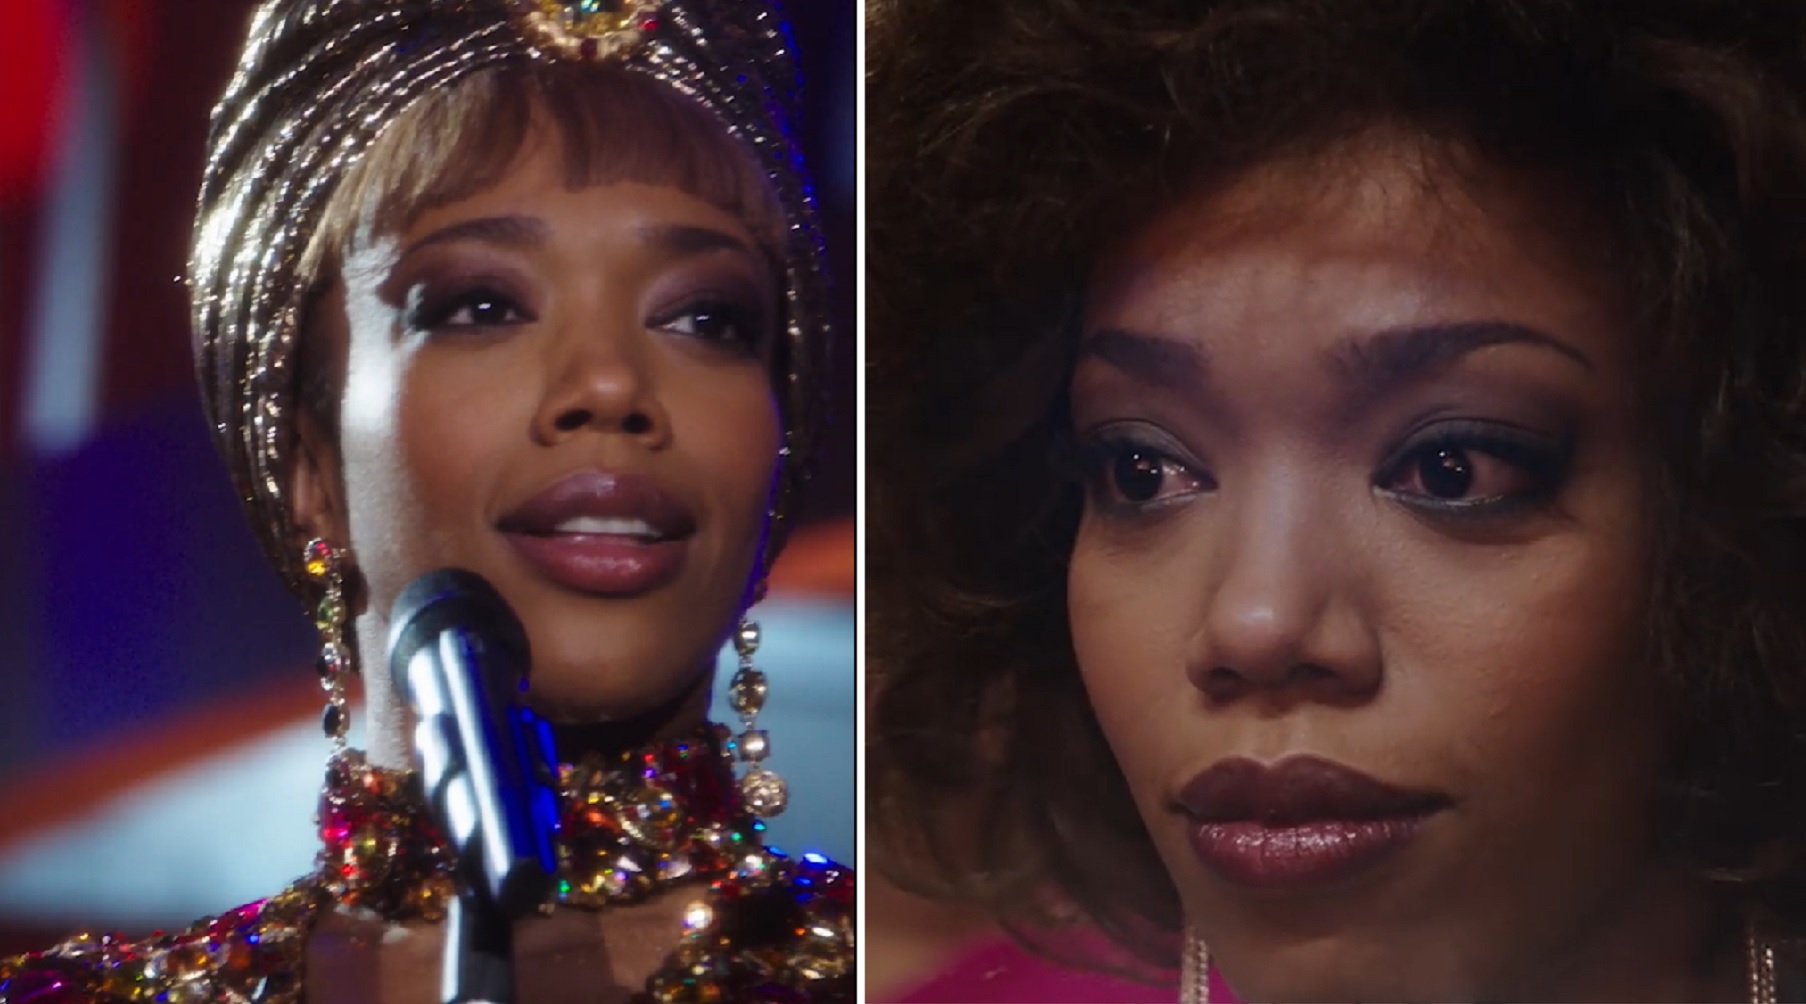 Emotional & Powerful: New Trailer For Singer Whitney Houston’s Biopic Released By Sony Pictures India